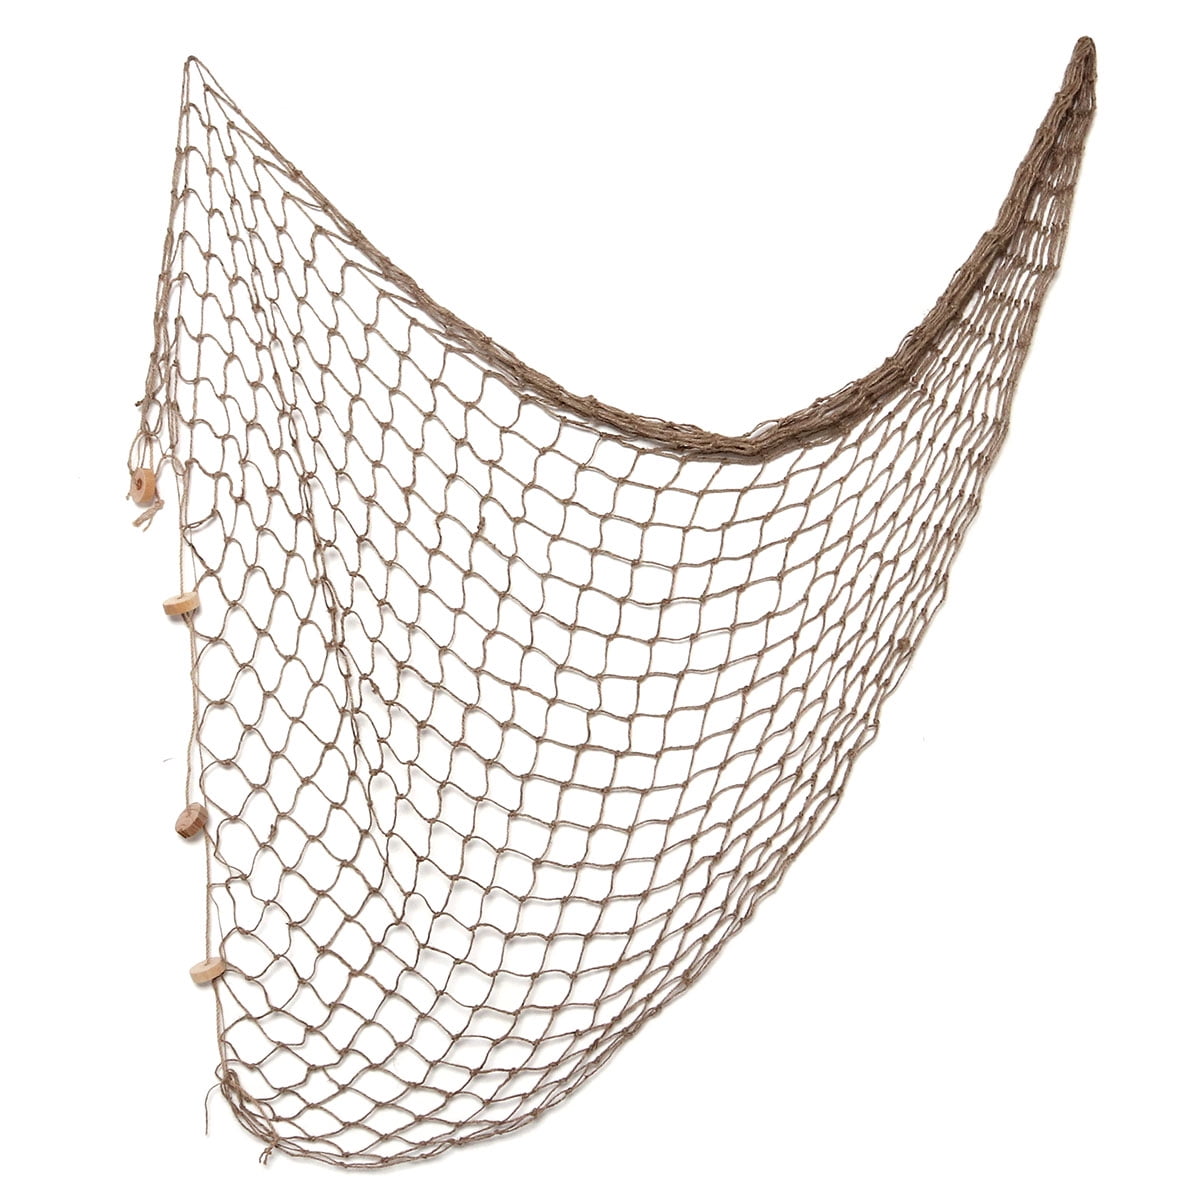 Nautical Fishing Net Decor for Party Sanlykate Decorative Fish Net 200x150cm Mediterranean Style Photographing Accessory Natural Cotton Fishnet Decor for Wall/Table/Home